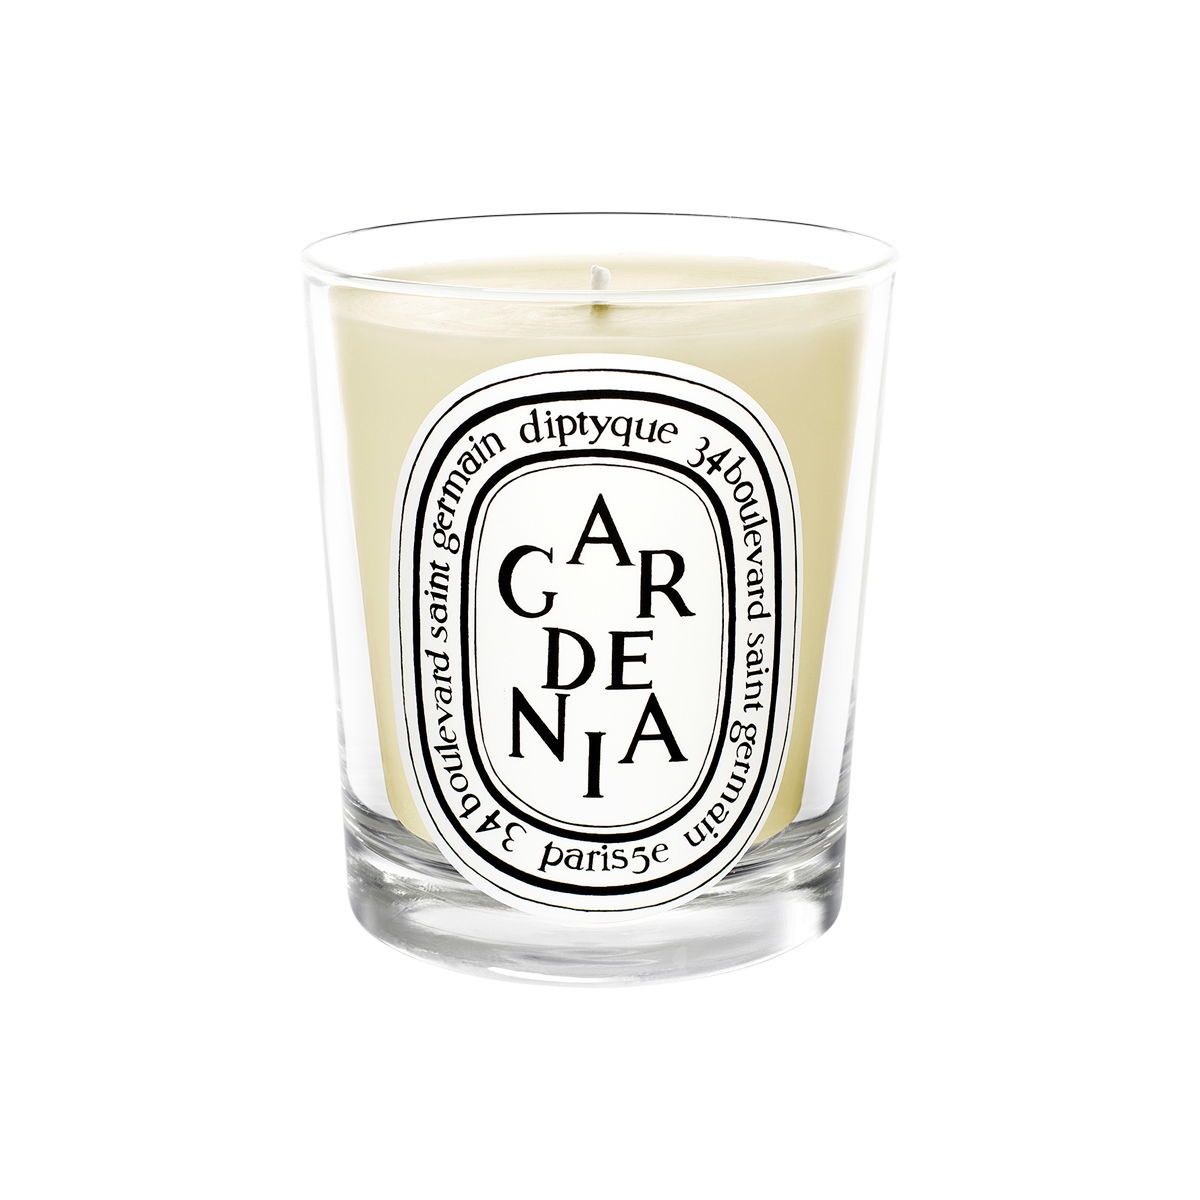 Diptyque - Gardenia Scented Candle